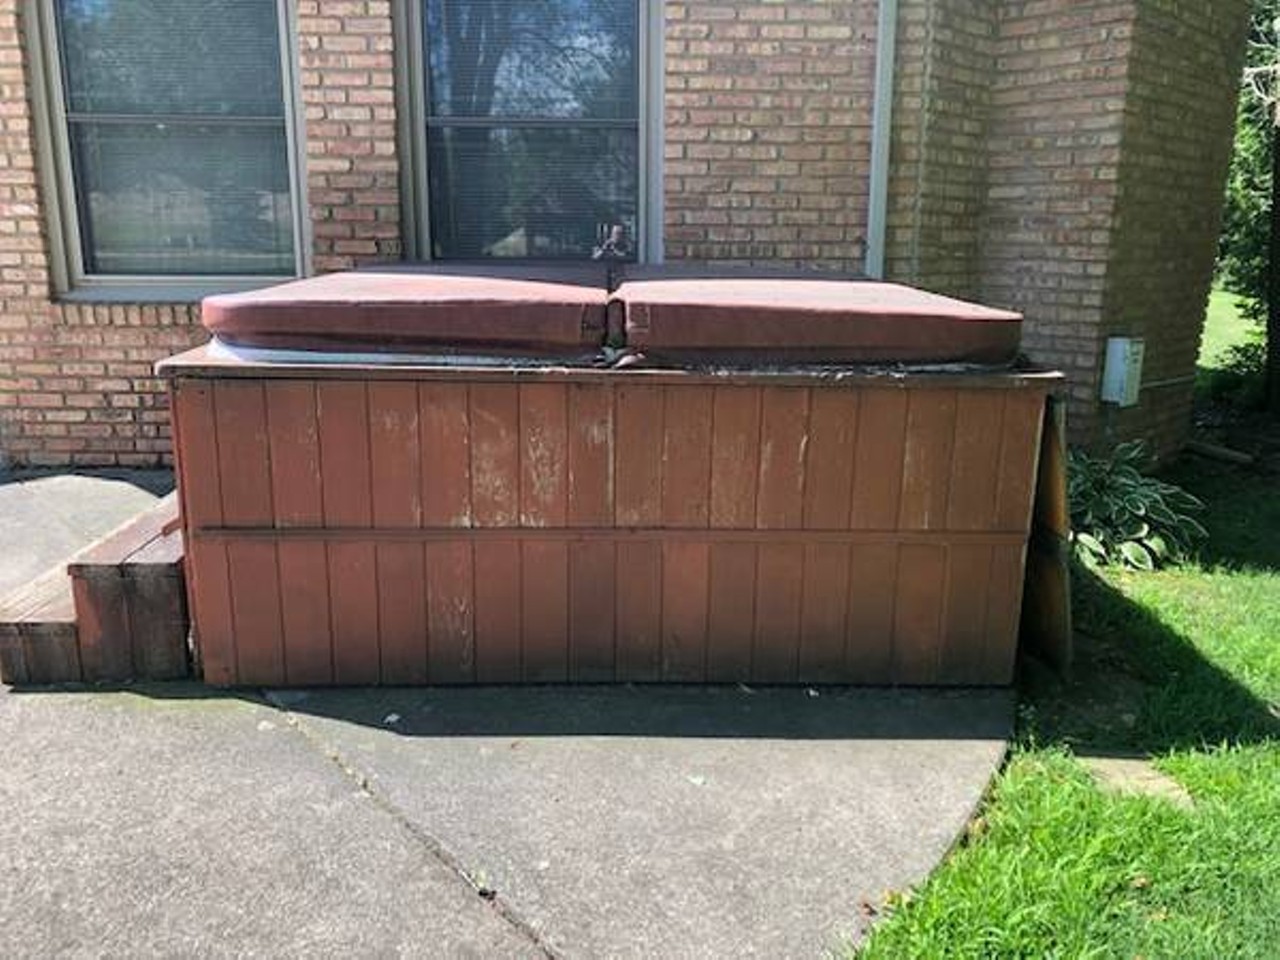 Free Hot Tub (Free)
I mean, if you&#146;re offering.
Photo via  Craigslist